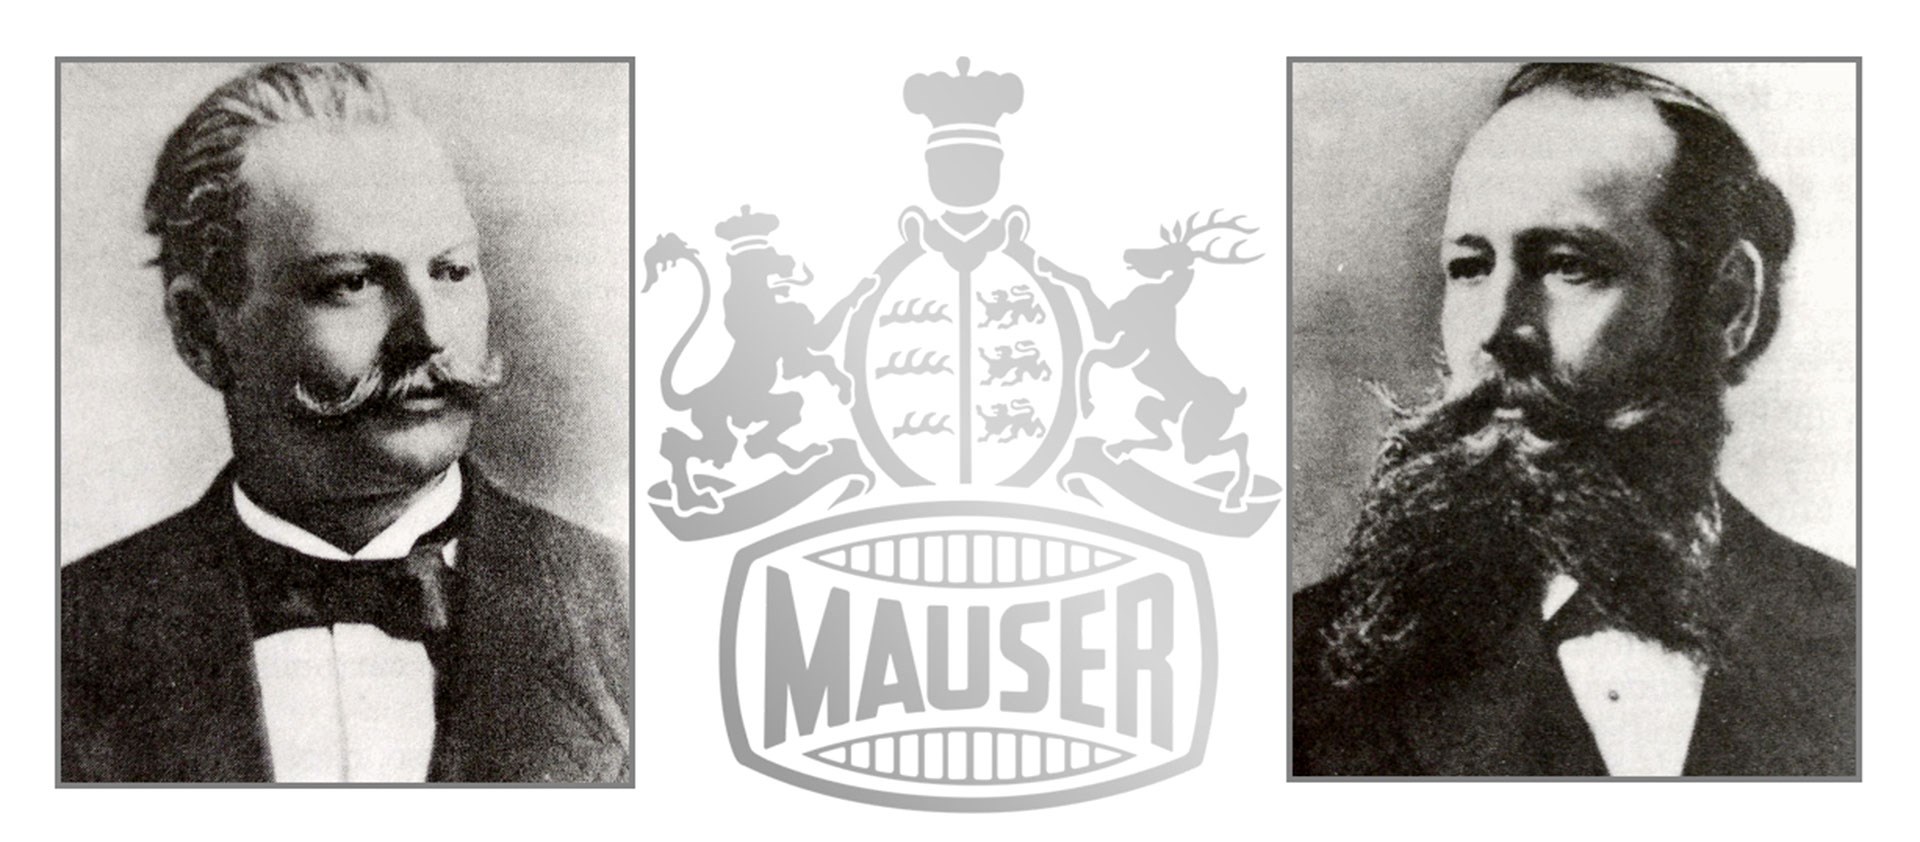 Mauser brothers Paul and Wilhelm